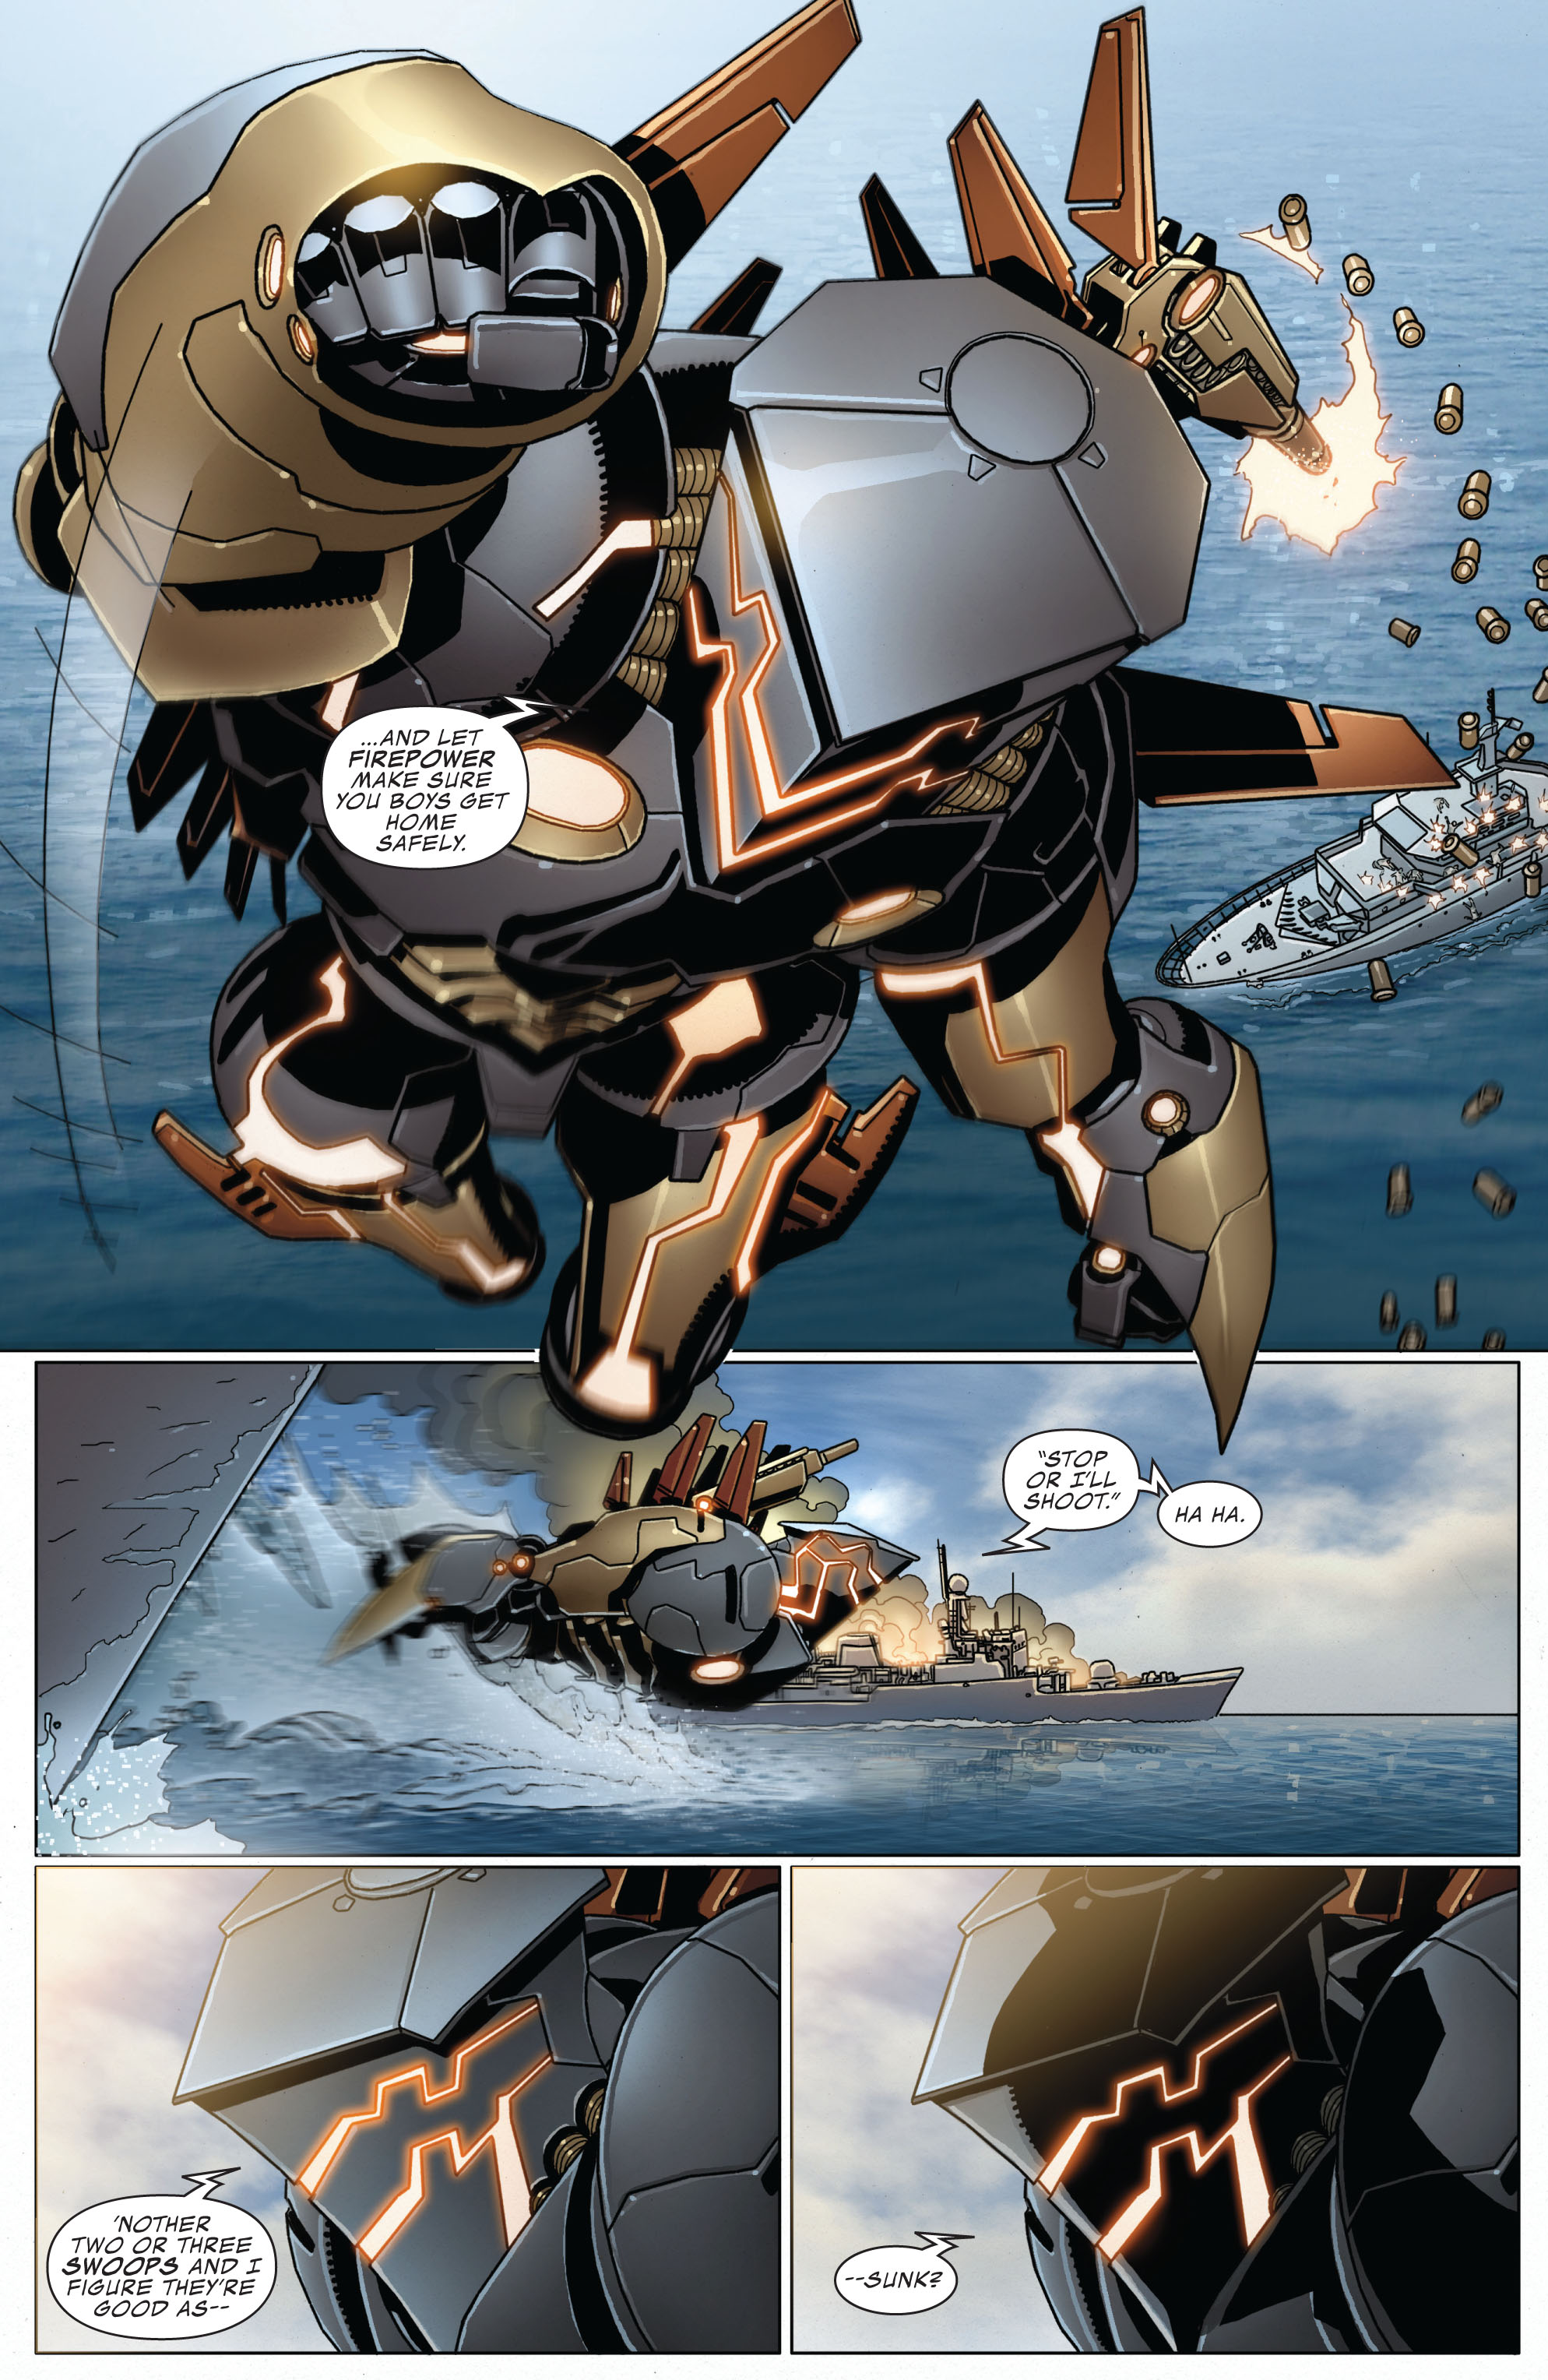 Invincible Iron Man (2008) 517 Page 20